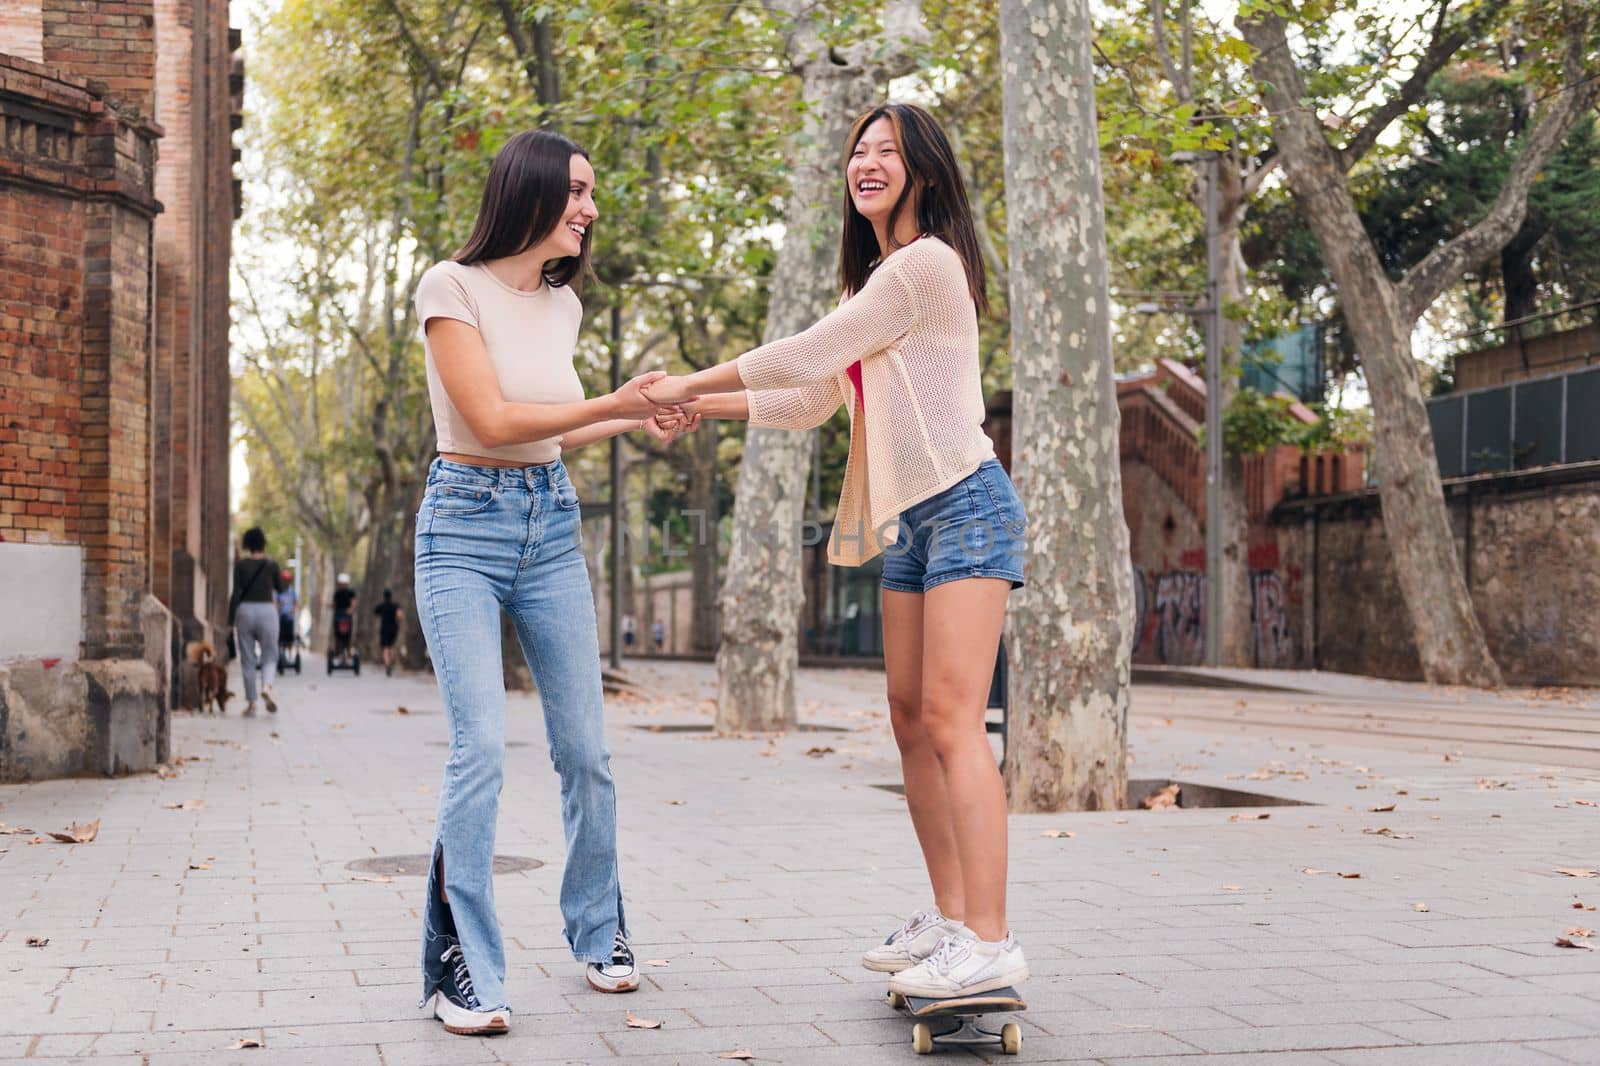 young woman having fun teaching her friend to ride a skateboard, concept of friendship and teenager lifestyle